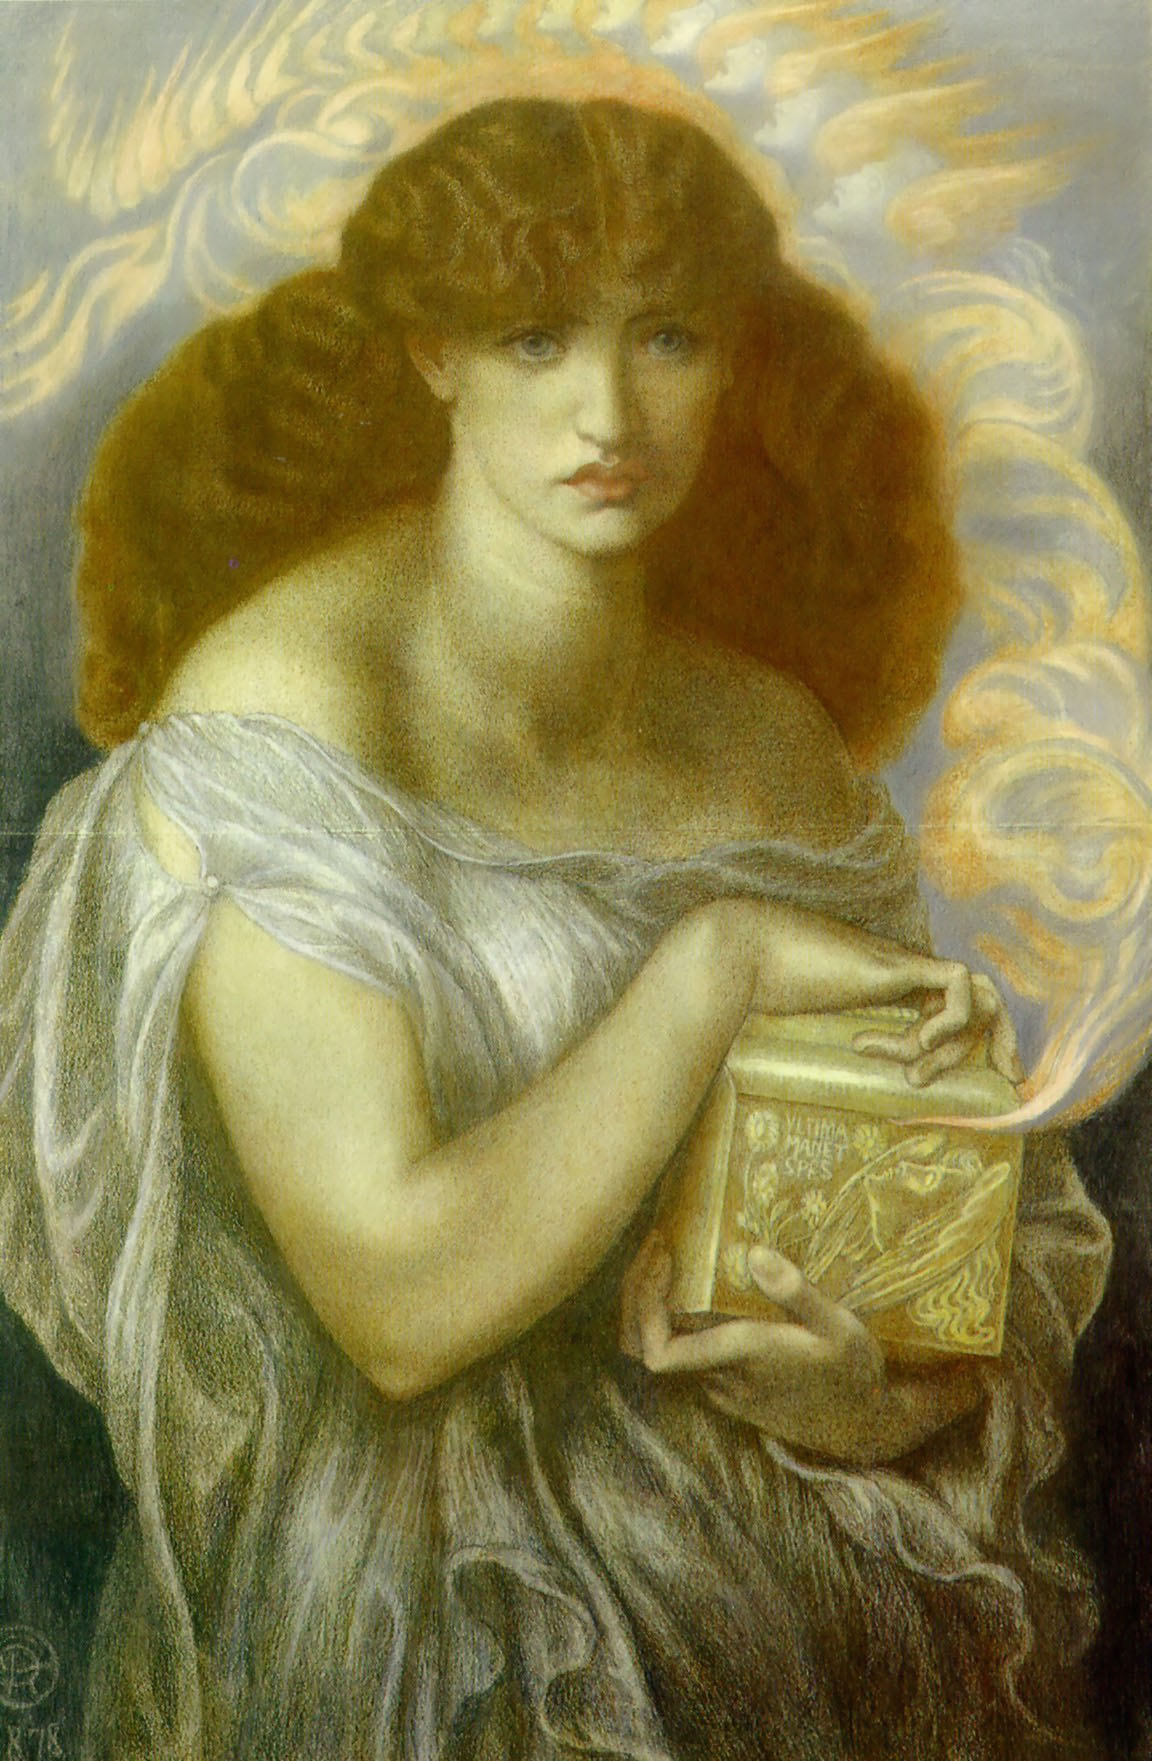 A painting of a woman holding a box. She glows like the sun with her golden locks of hair and white dress.